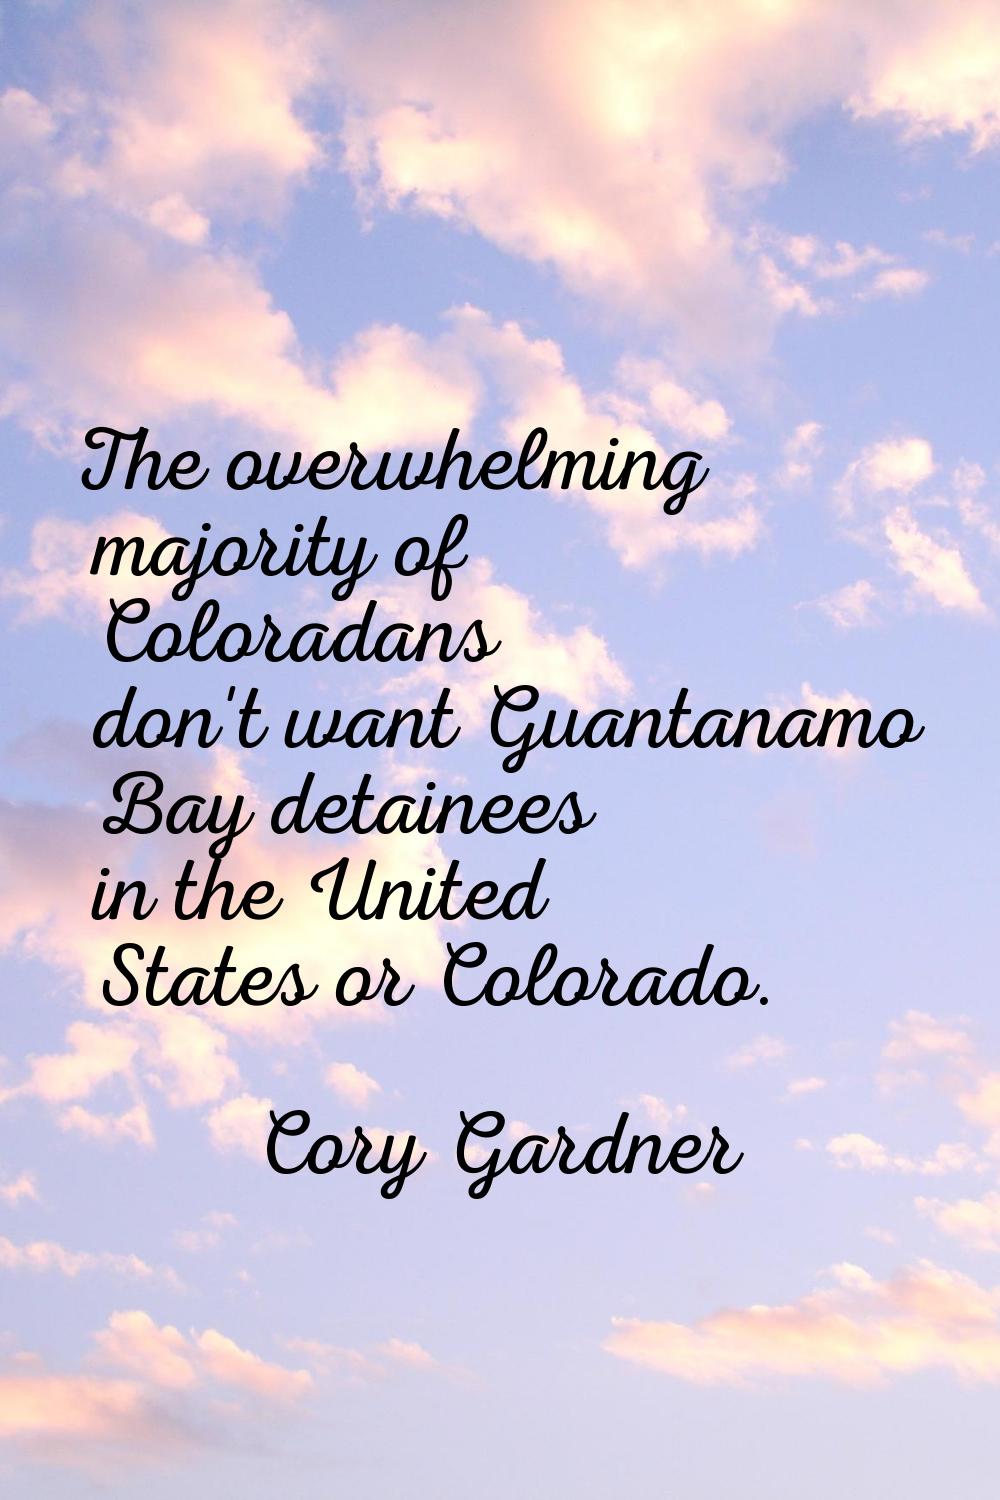 The overwhelming majority of Coloradans don't want Guantanamo Bay detainees in the United States or